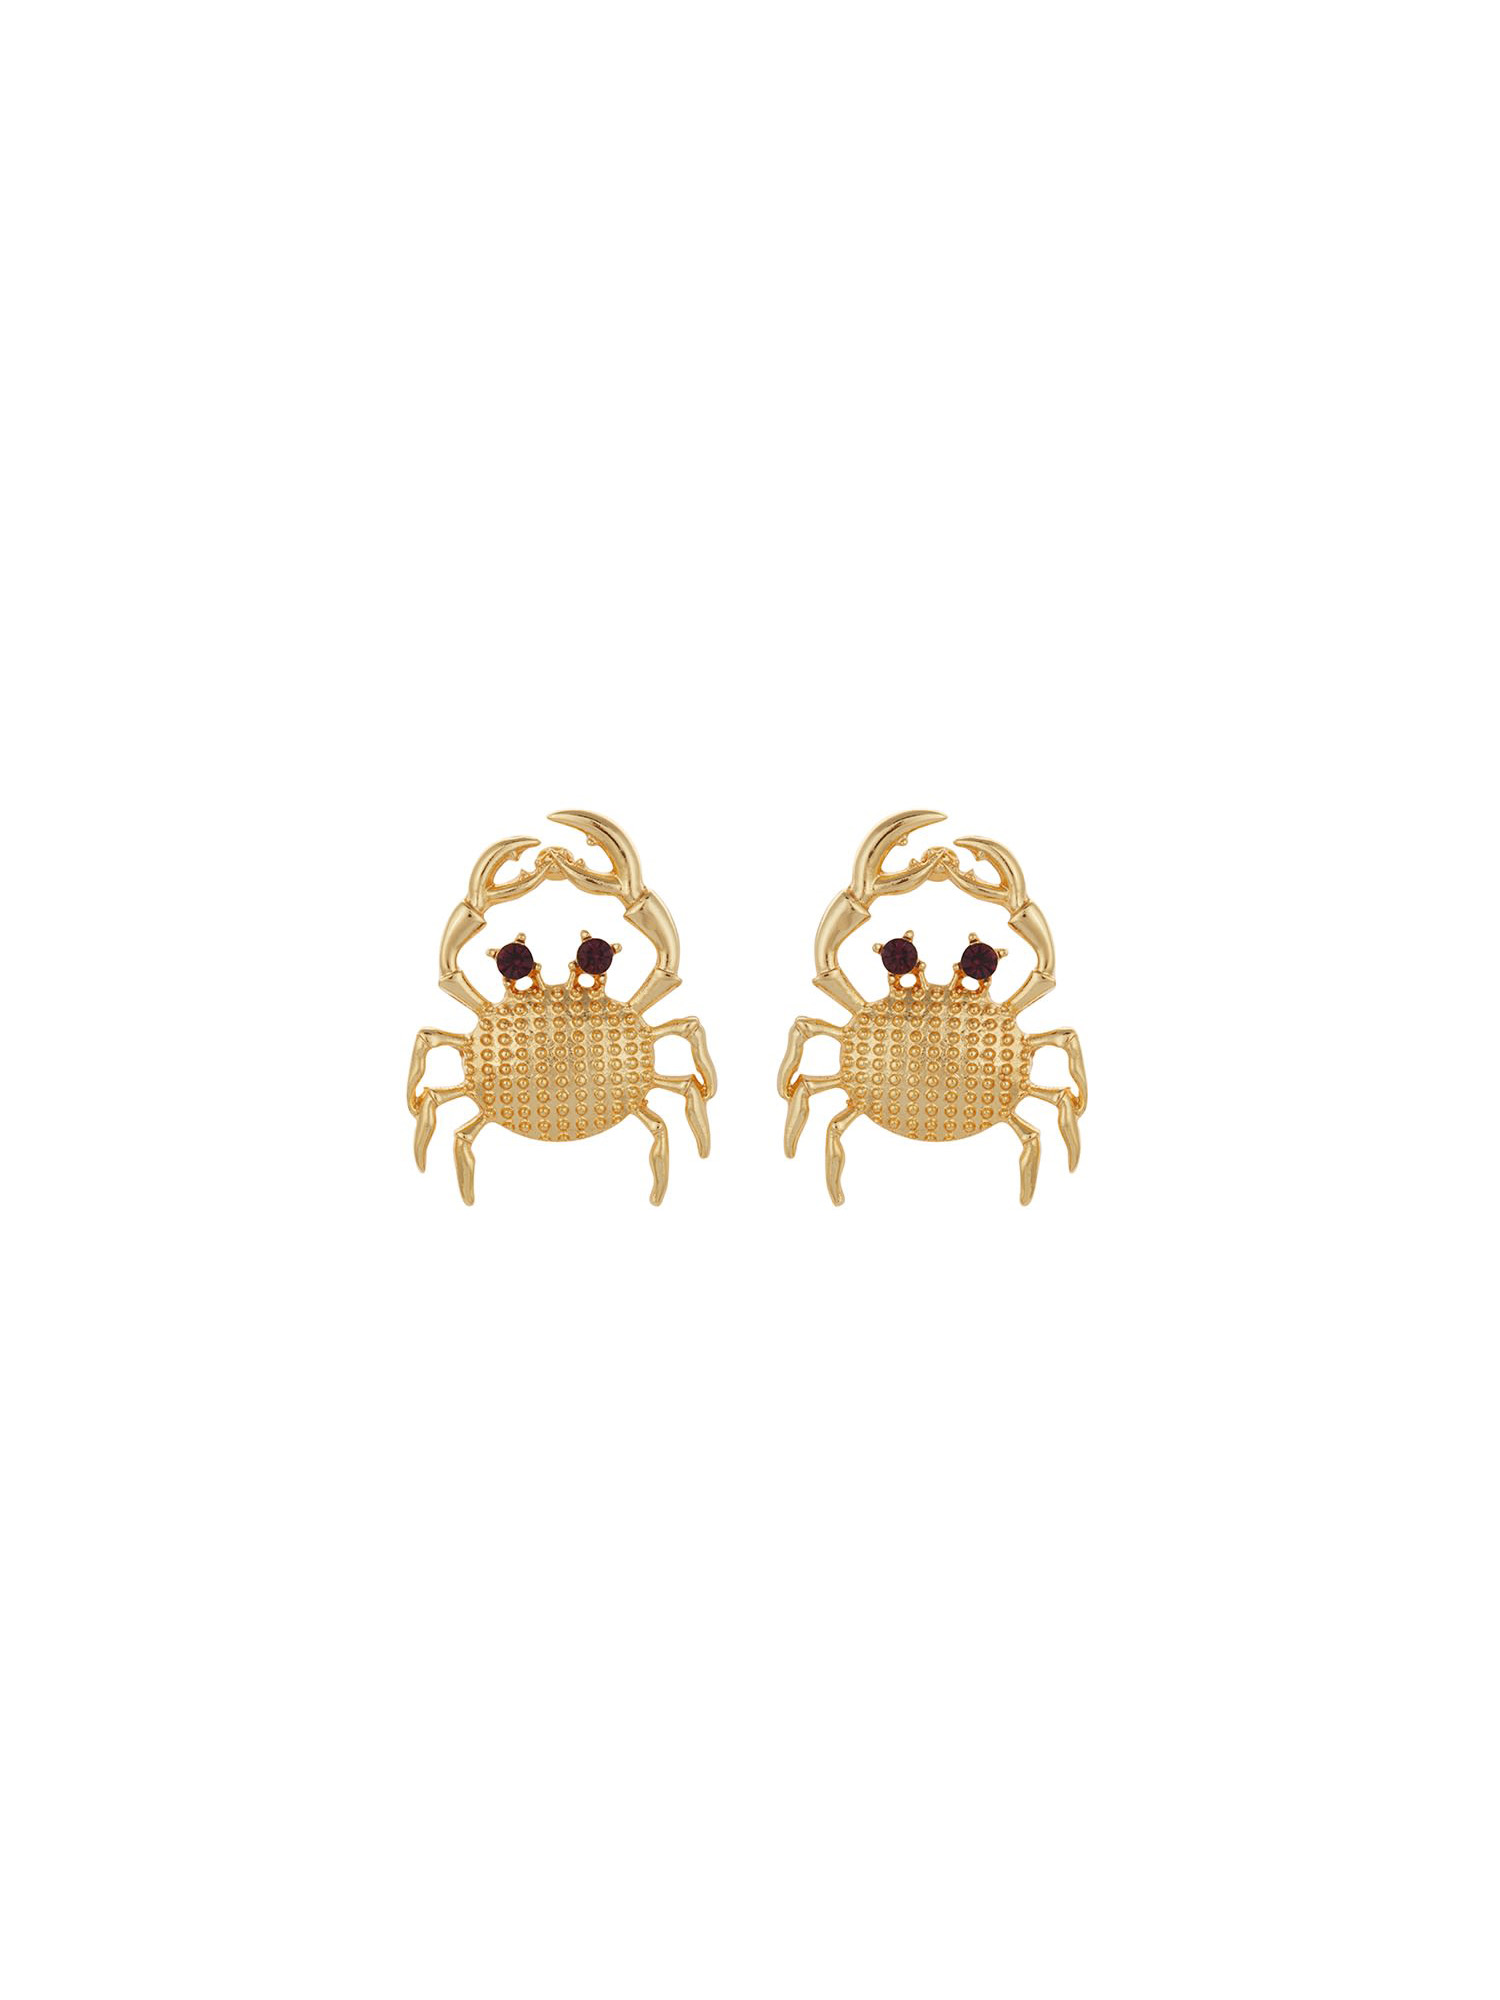 THE BABY CRAB EARRINGS GOLD